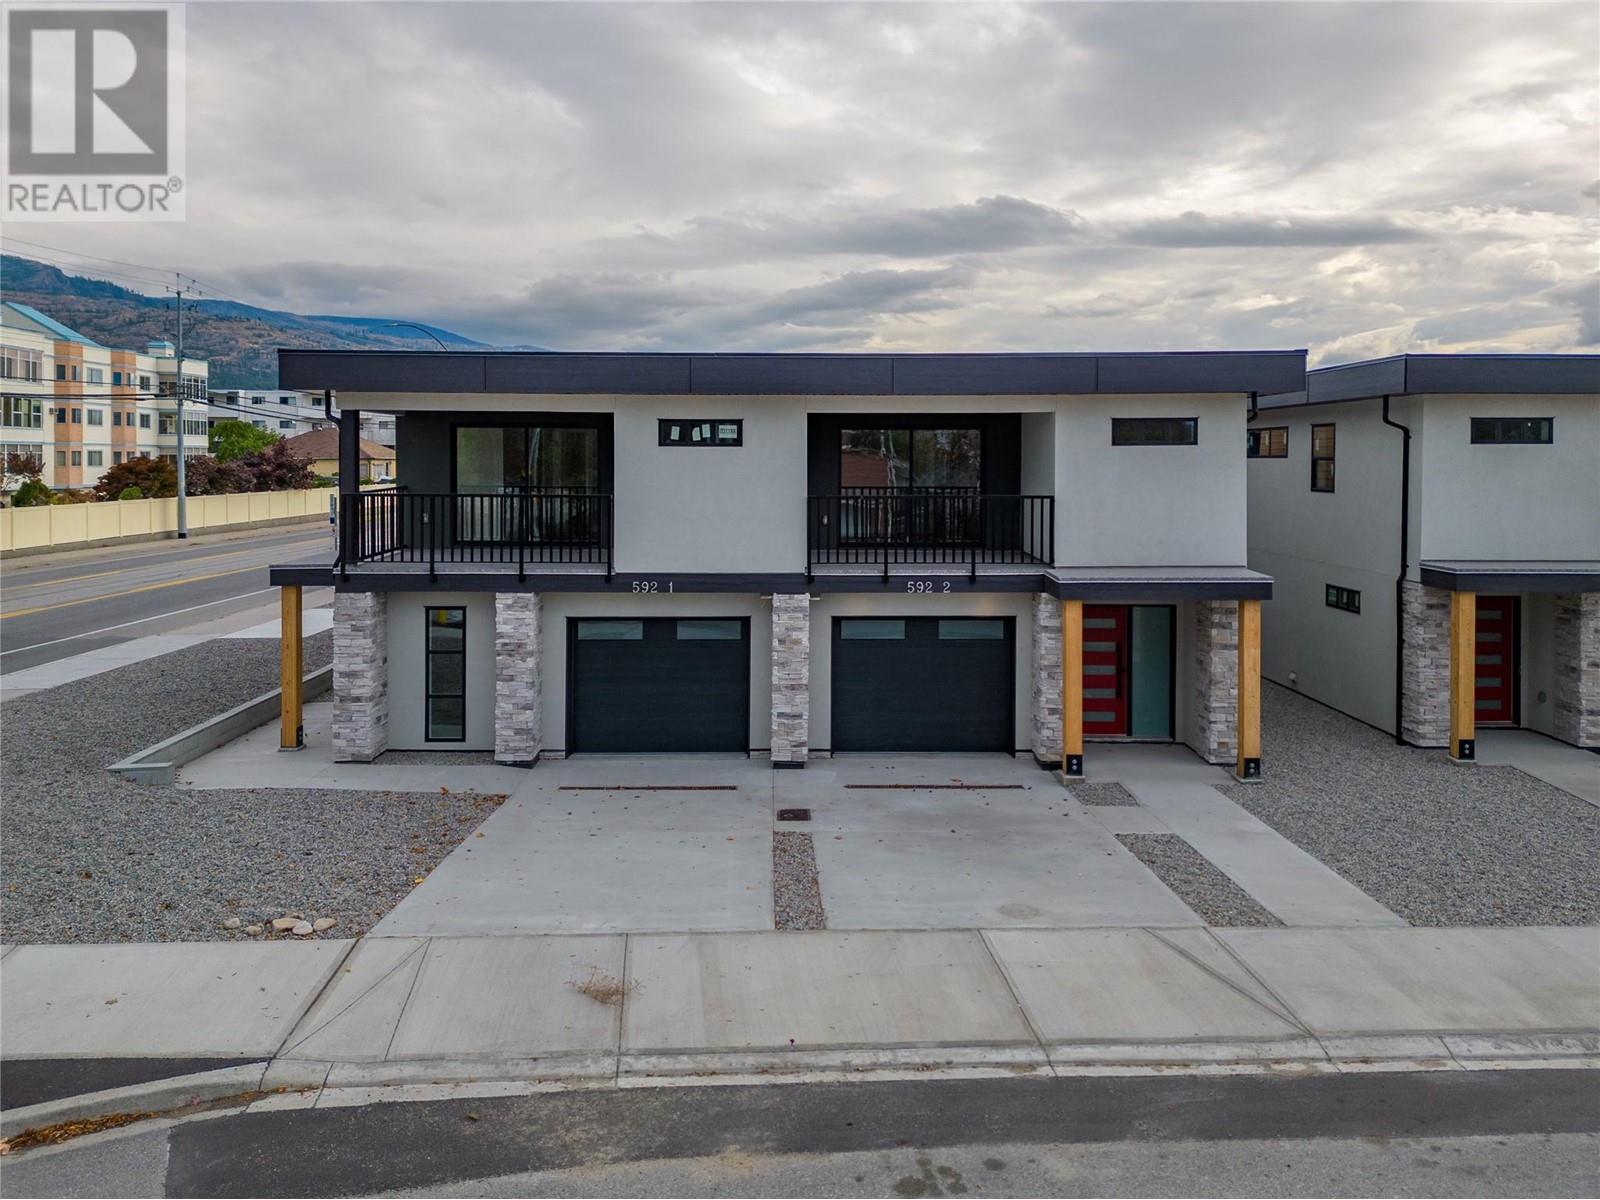 #2 592 Forestbrook Drive,, Penticton, British Columbia  V2A 4T8 - Photo 34 - 201627